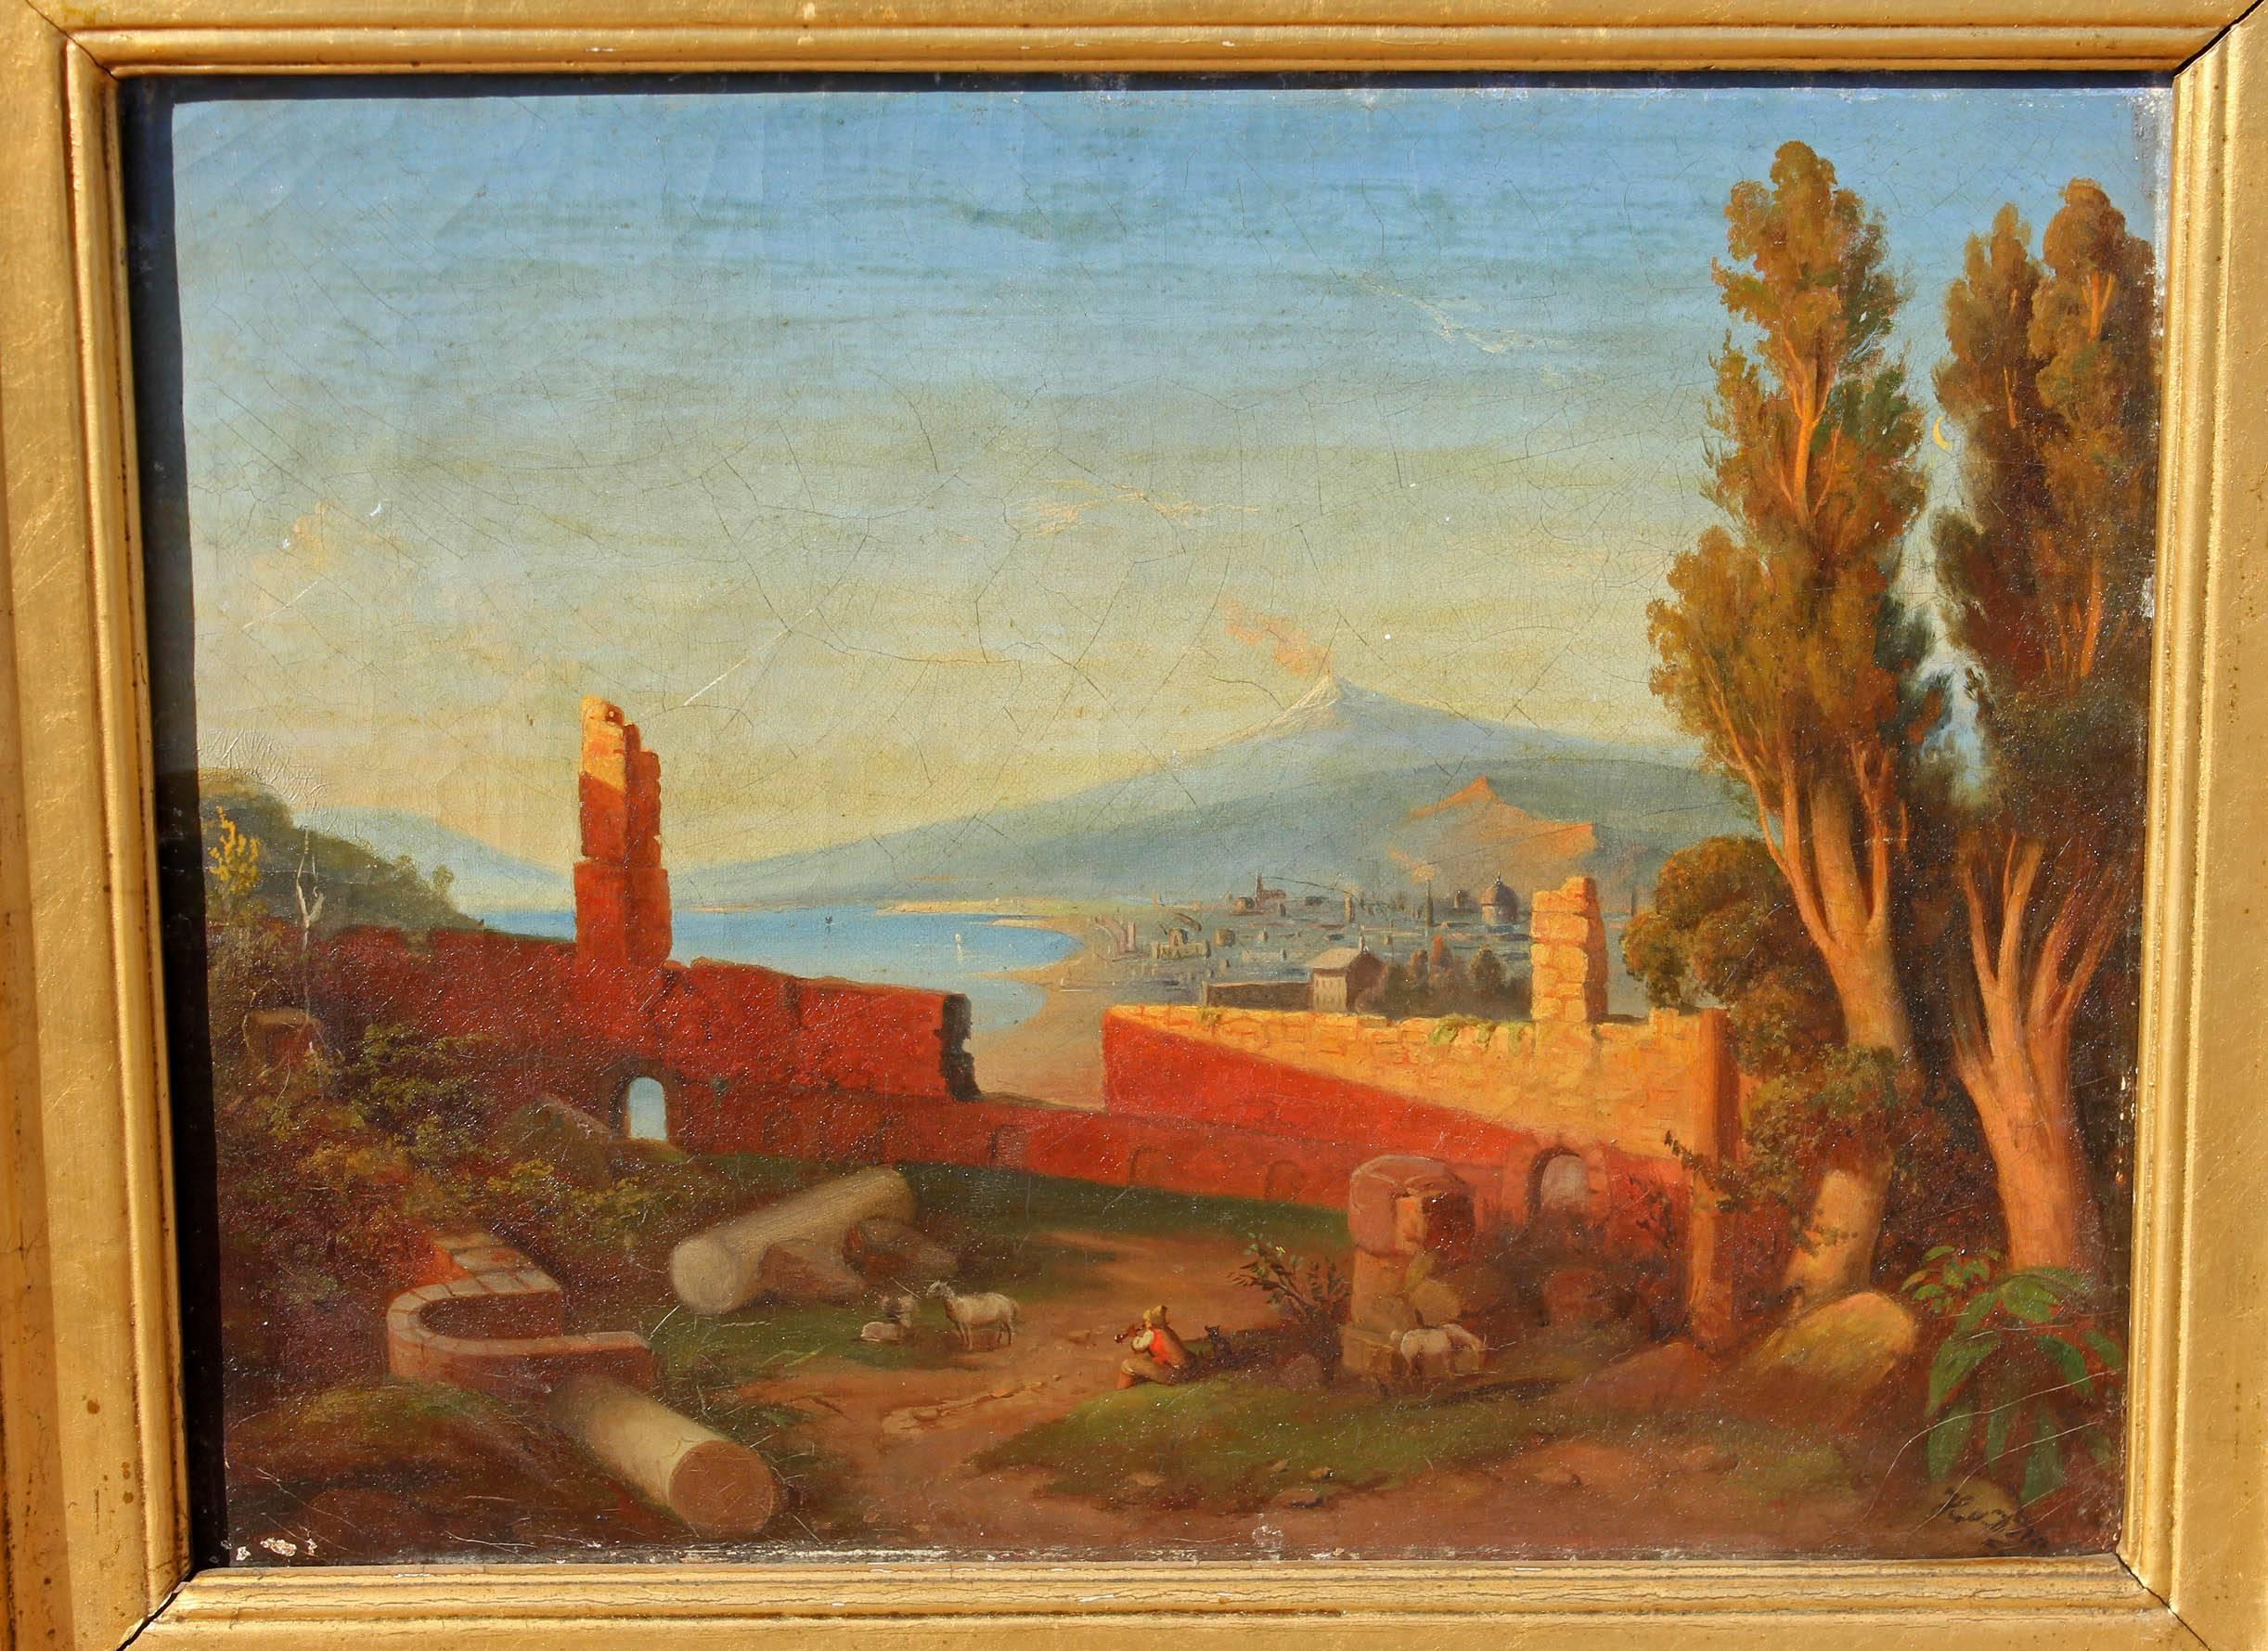 Sicilian landscape oil painting. View of Mount Etna from Taromina. Oil on canvas. Illegibly signed, circa 1860s.